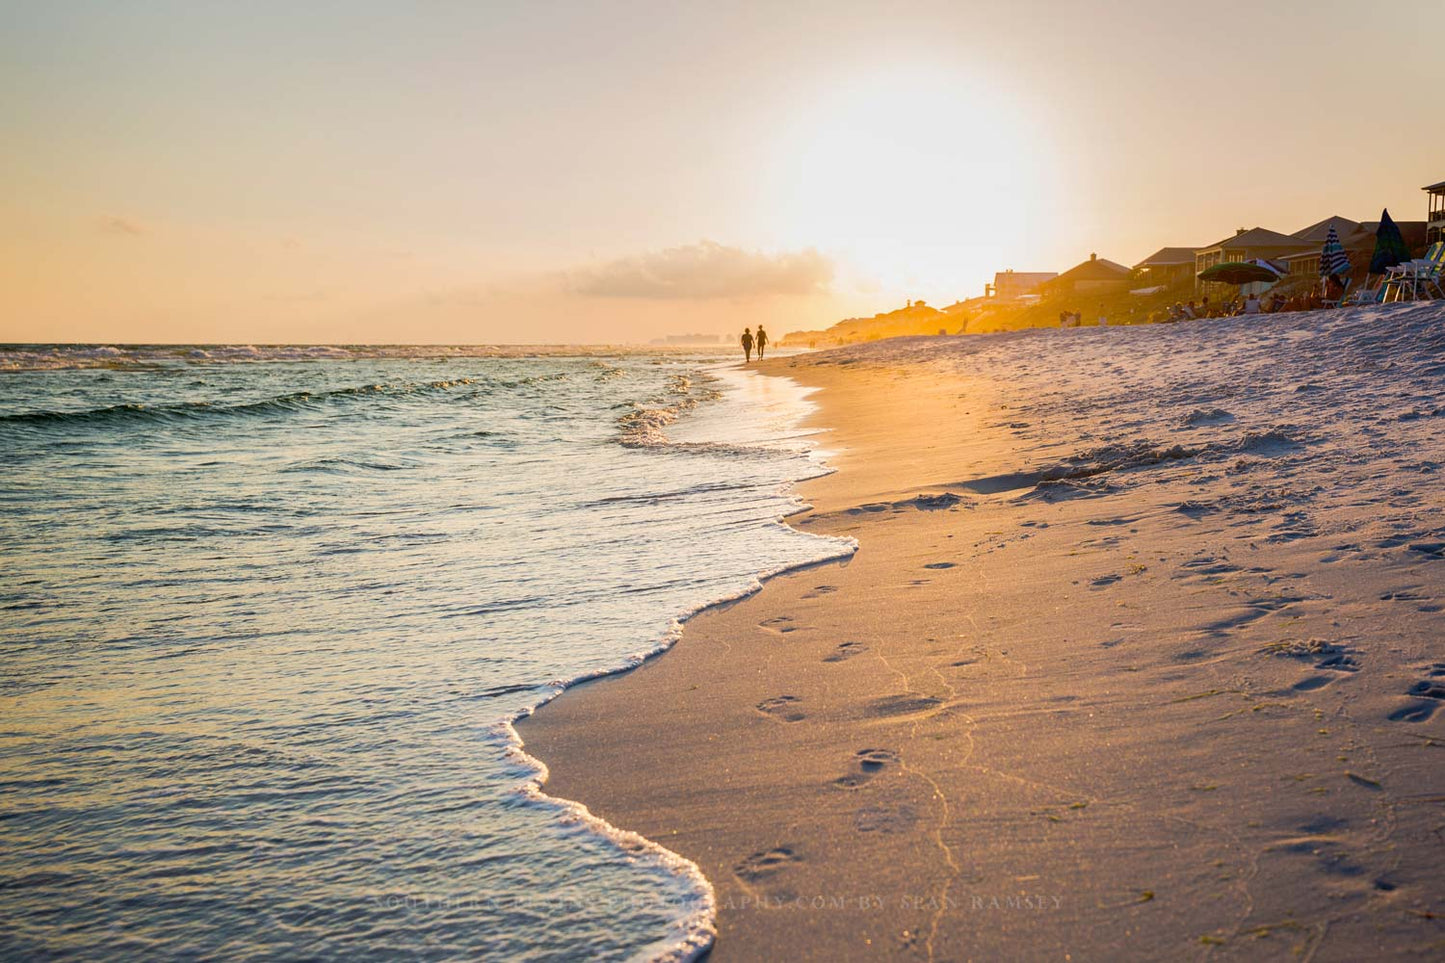 Coastal photography print of people walking along the beach leaving footprints as waves roll ashore at sunset along the Gulf Coast in Destin, Florida by Sean Ramsey of Southern Plains Photography.